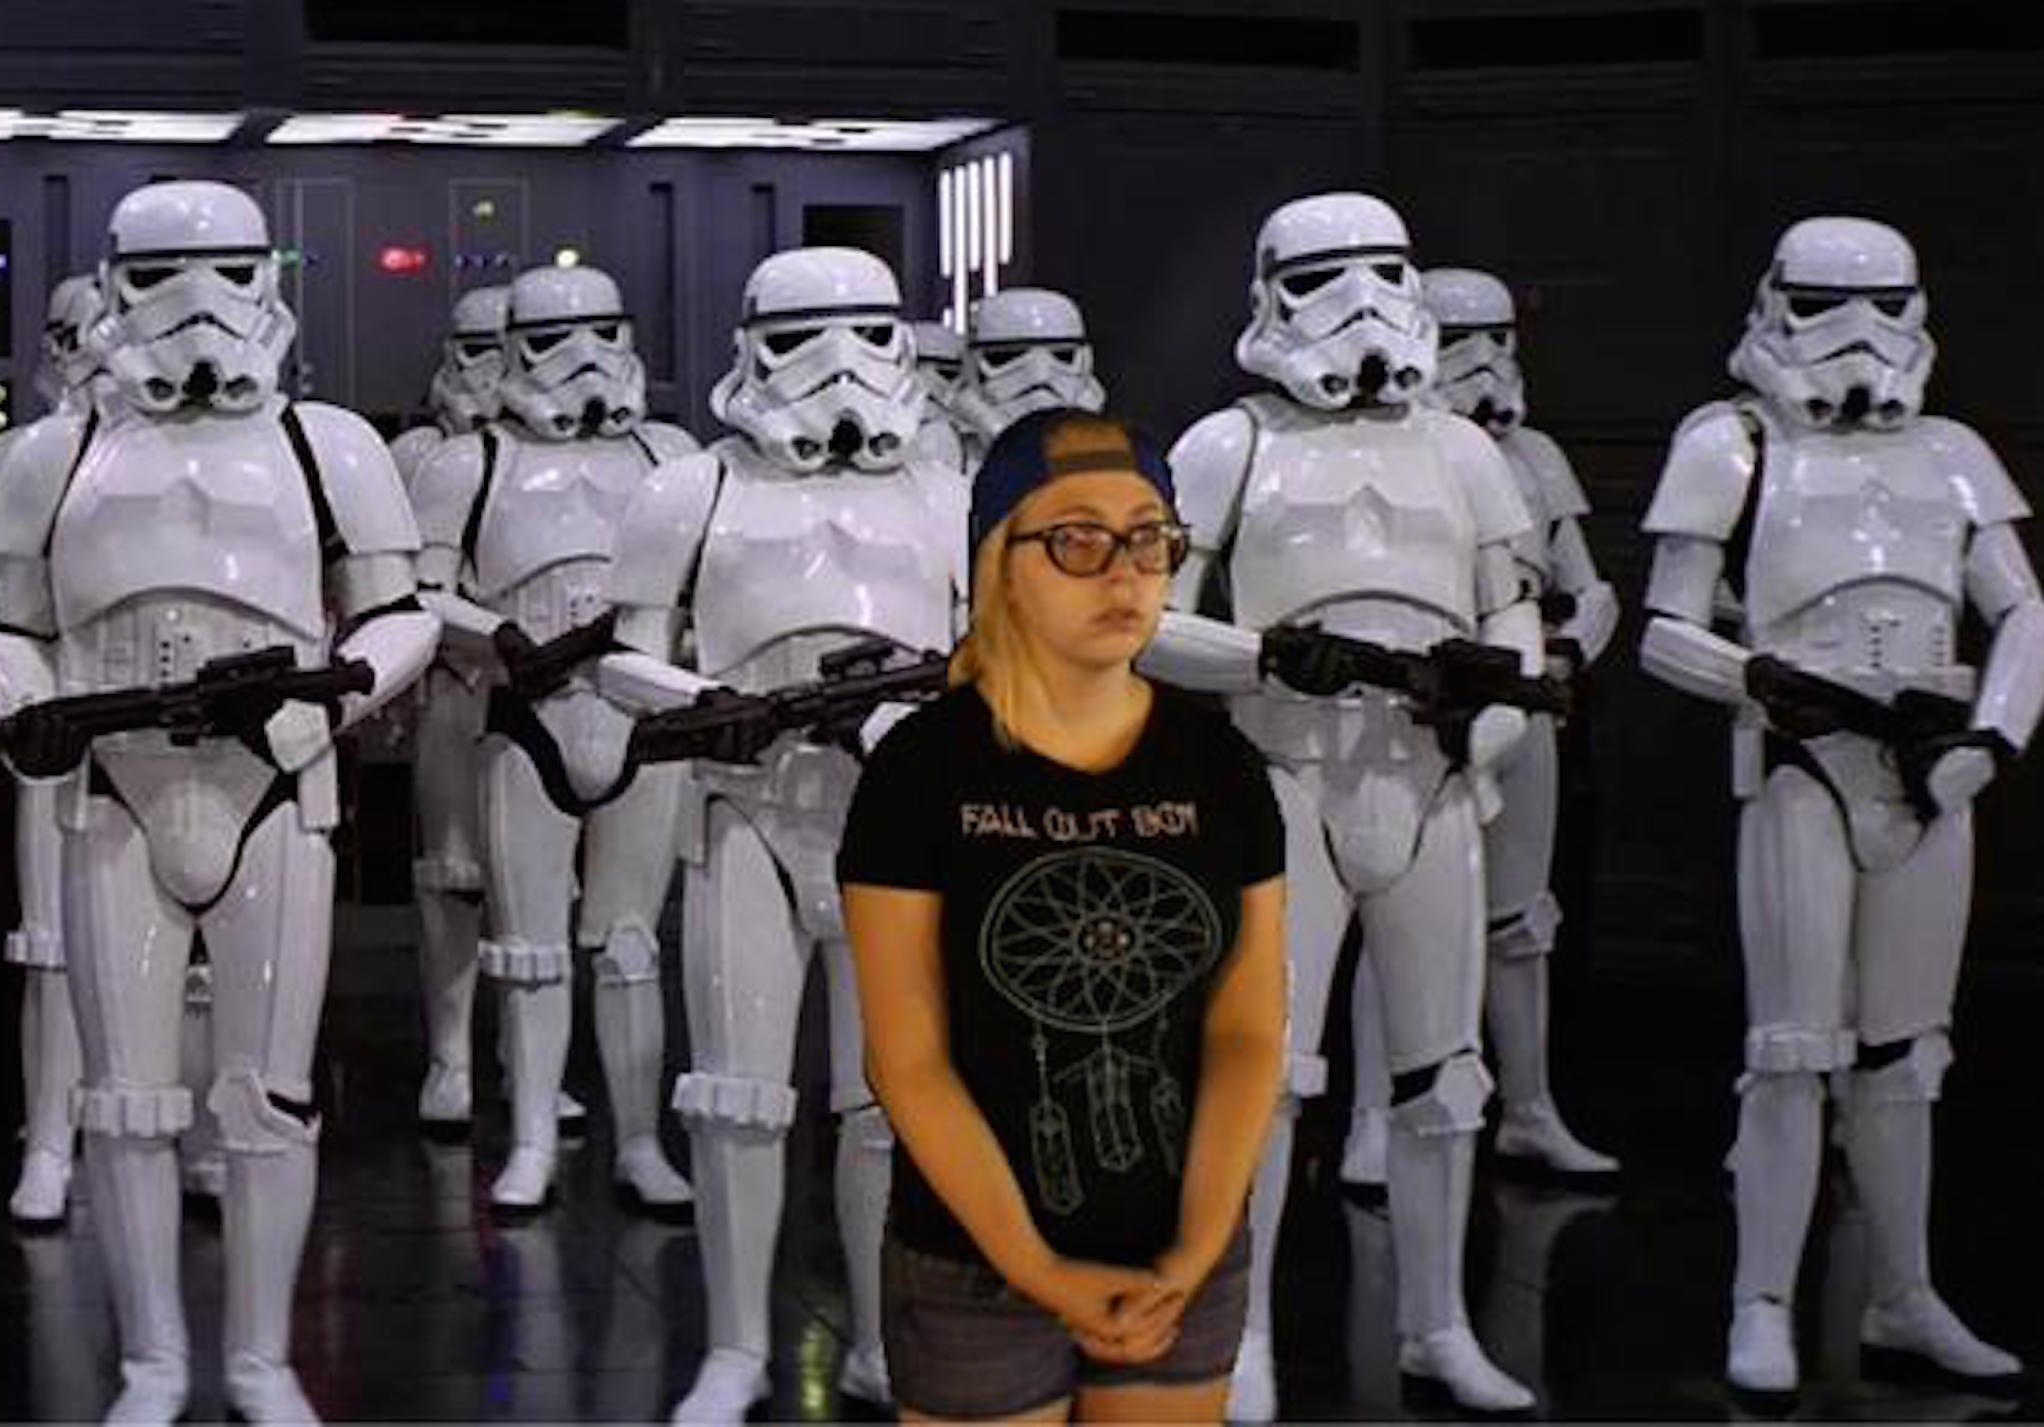 19-year-old Lexi protects storm troopers of the Galactic Empire.